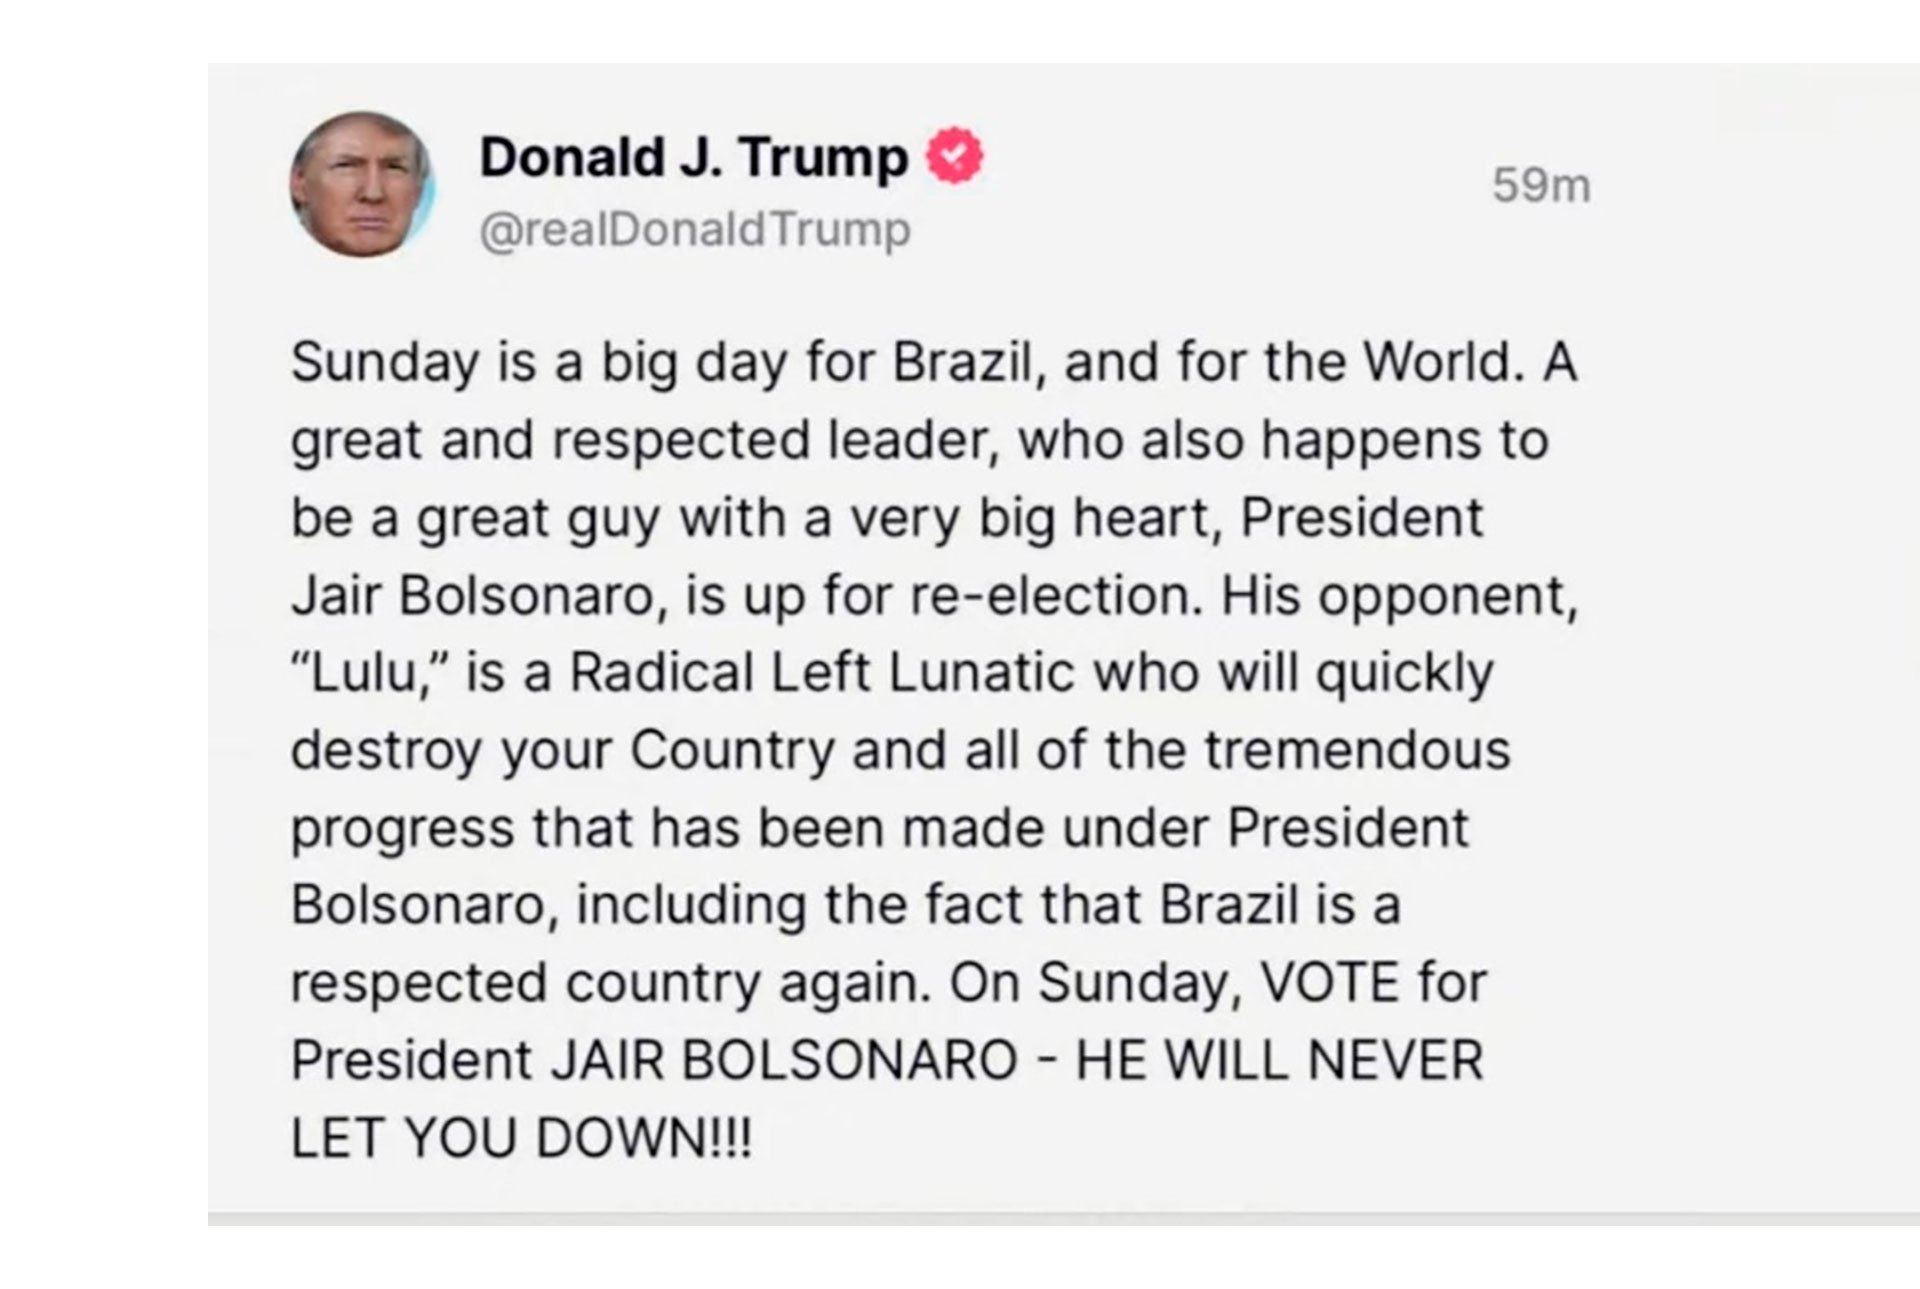 Trump's comments in support of Bolsonaro